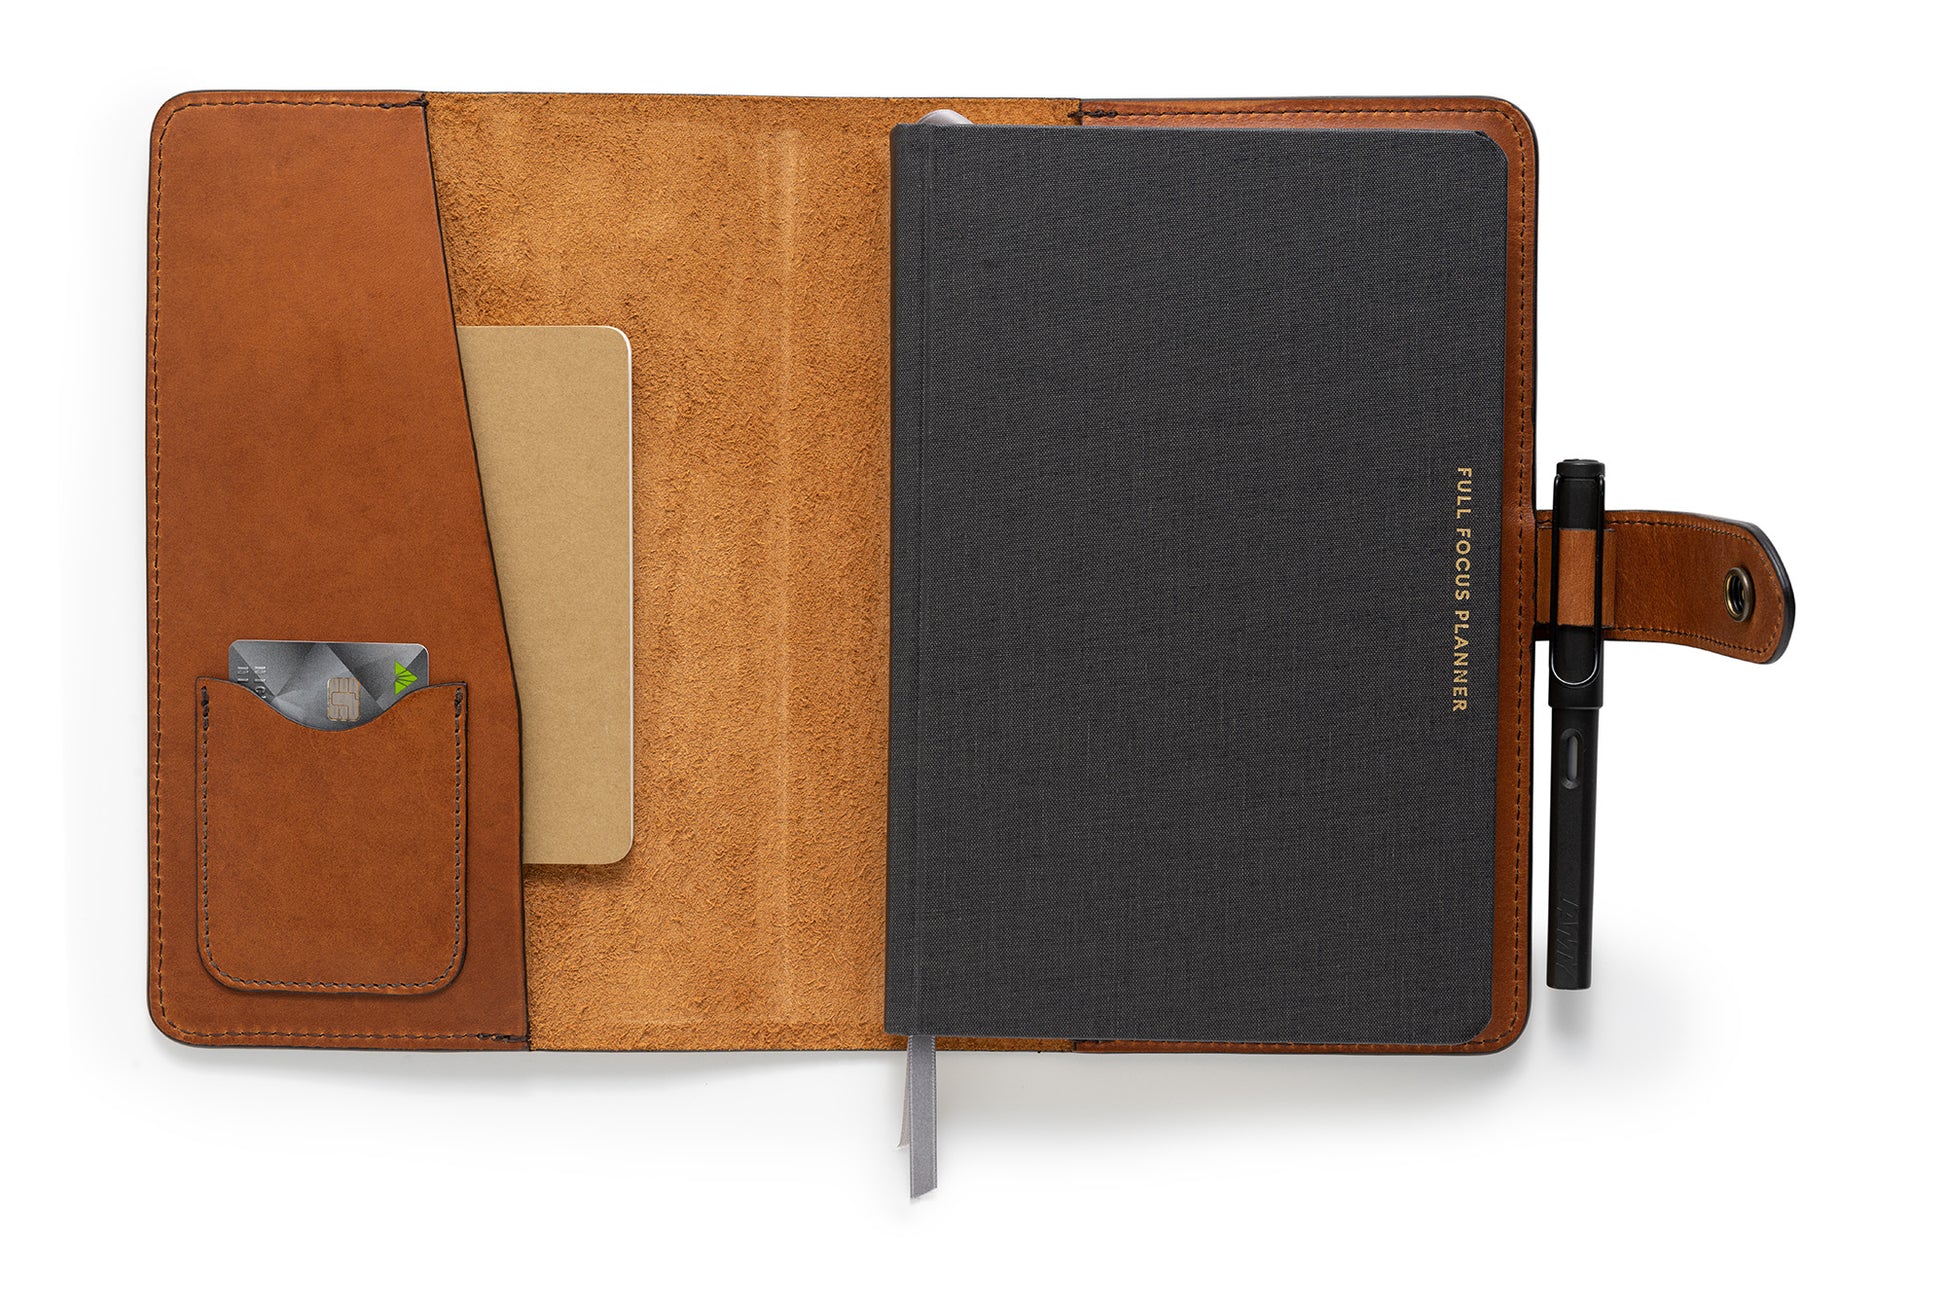 inside pockets of full grain leather planner cover to fit full focus planner by Michael Hyatt - pictured in saddle tan